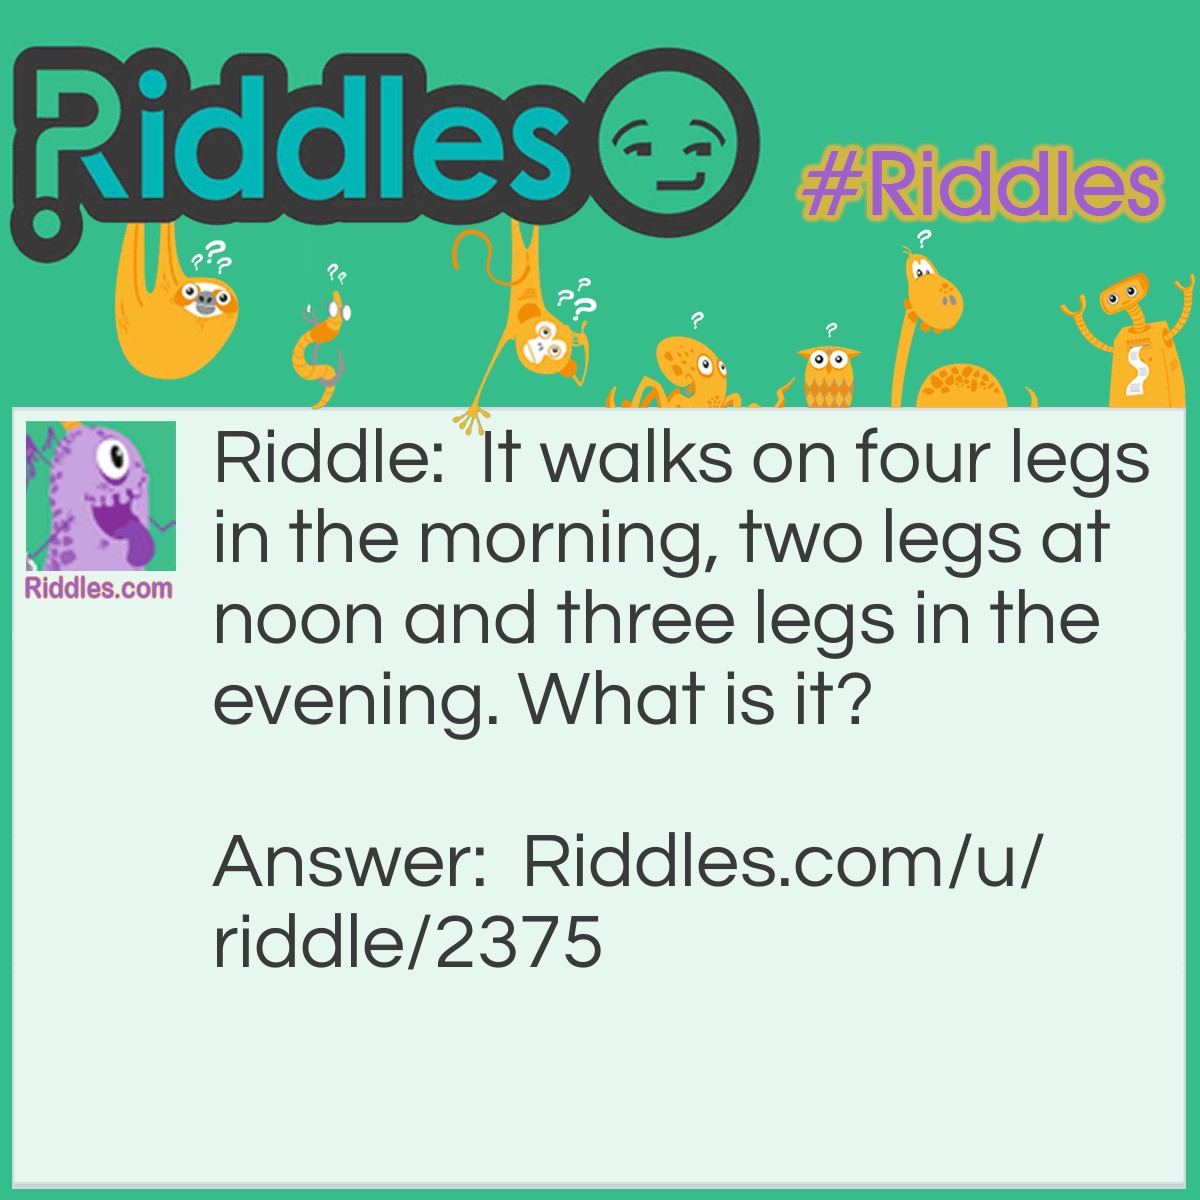 Riddle: It walks on four legs in the morning, two legs at noon and three legs in the evening. What is it? Answer: Humans. Crawls on all fours as a baby, walks on two legs as an adult and uses two legs and a cane when they're old.